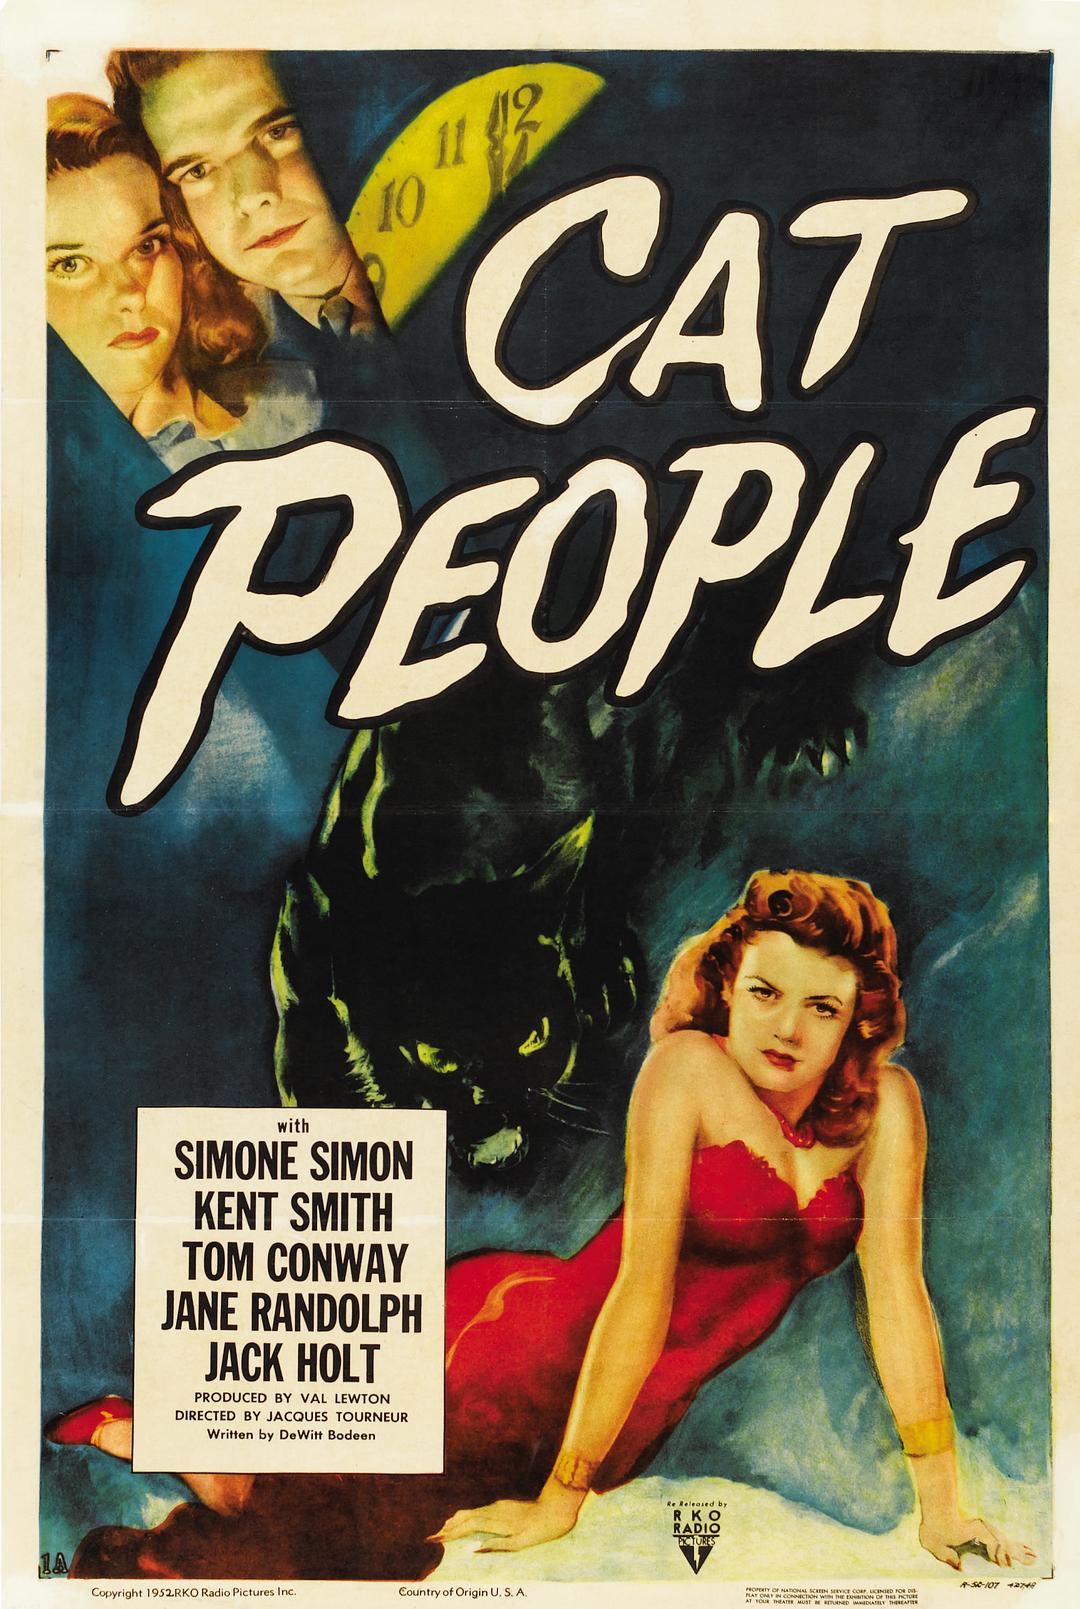 / Cat.People.1942.RESTORED.1080p.BluRay.X264-AMIABLE 6.56GB-1.png